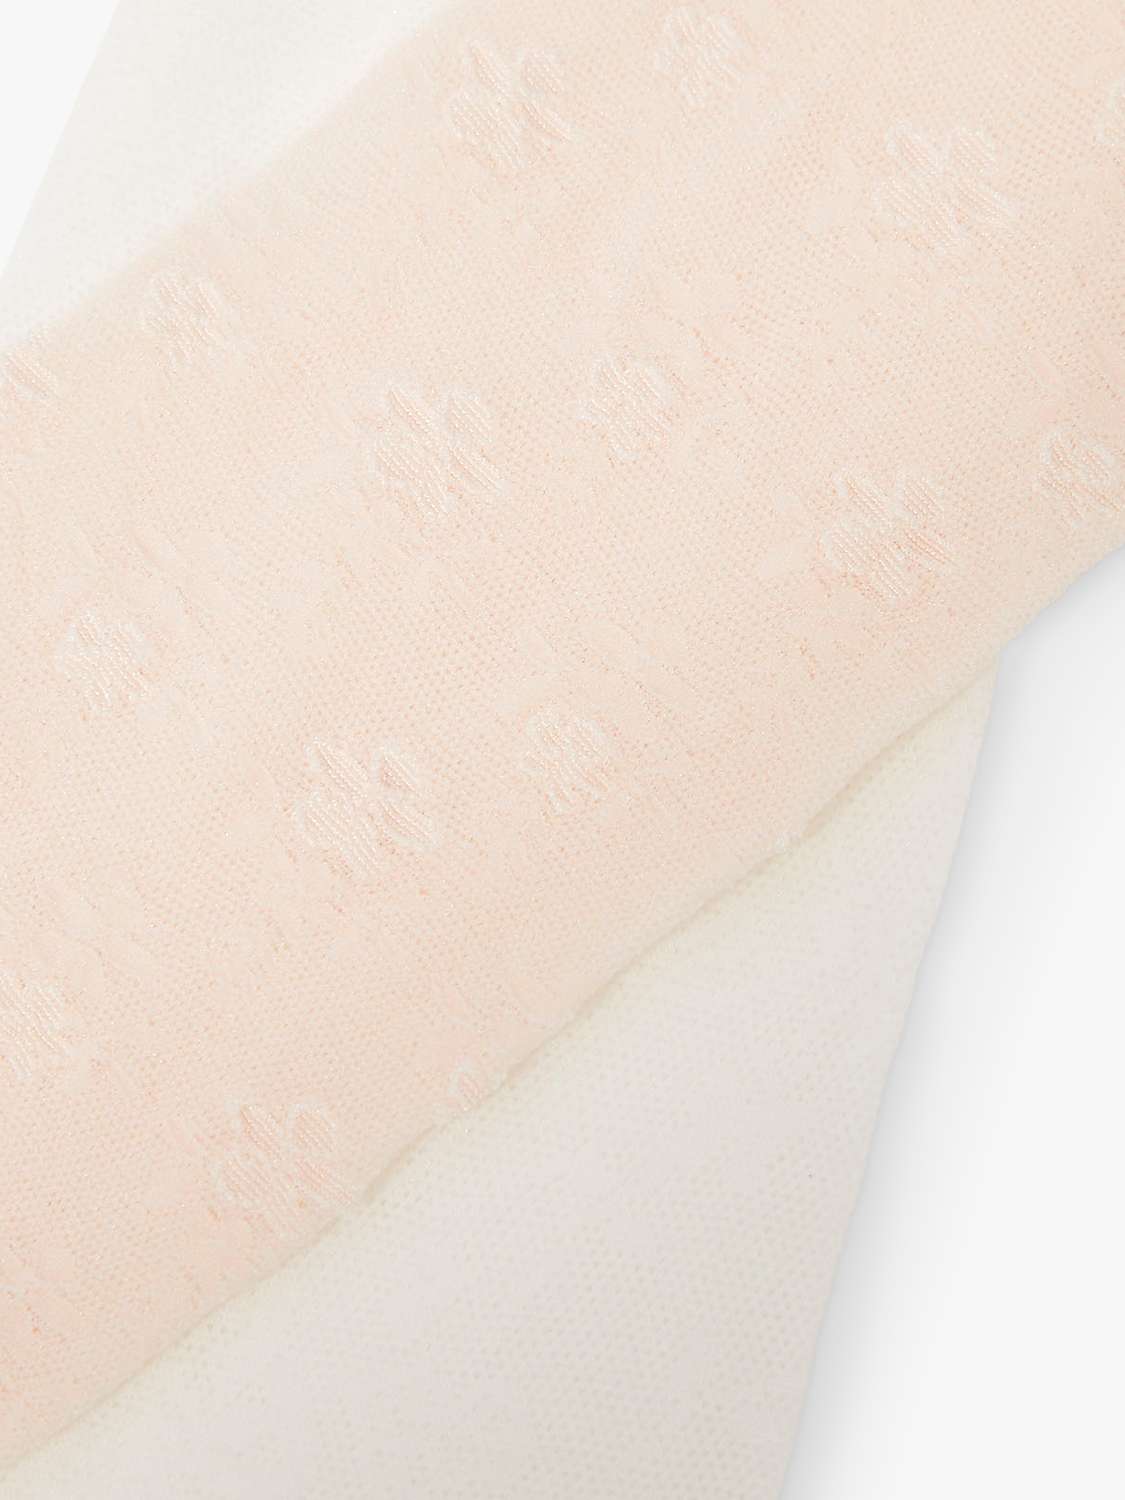 Buy Monsoon Kids' Lacey Tights, Pack of 2, Pink Online at johnlewis.com